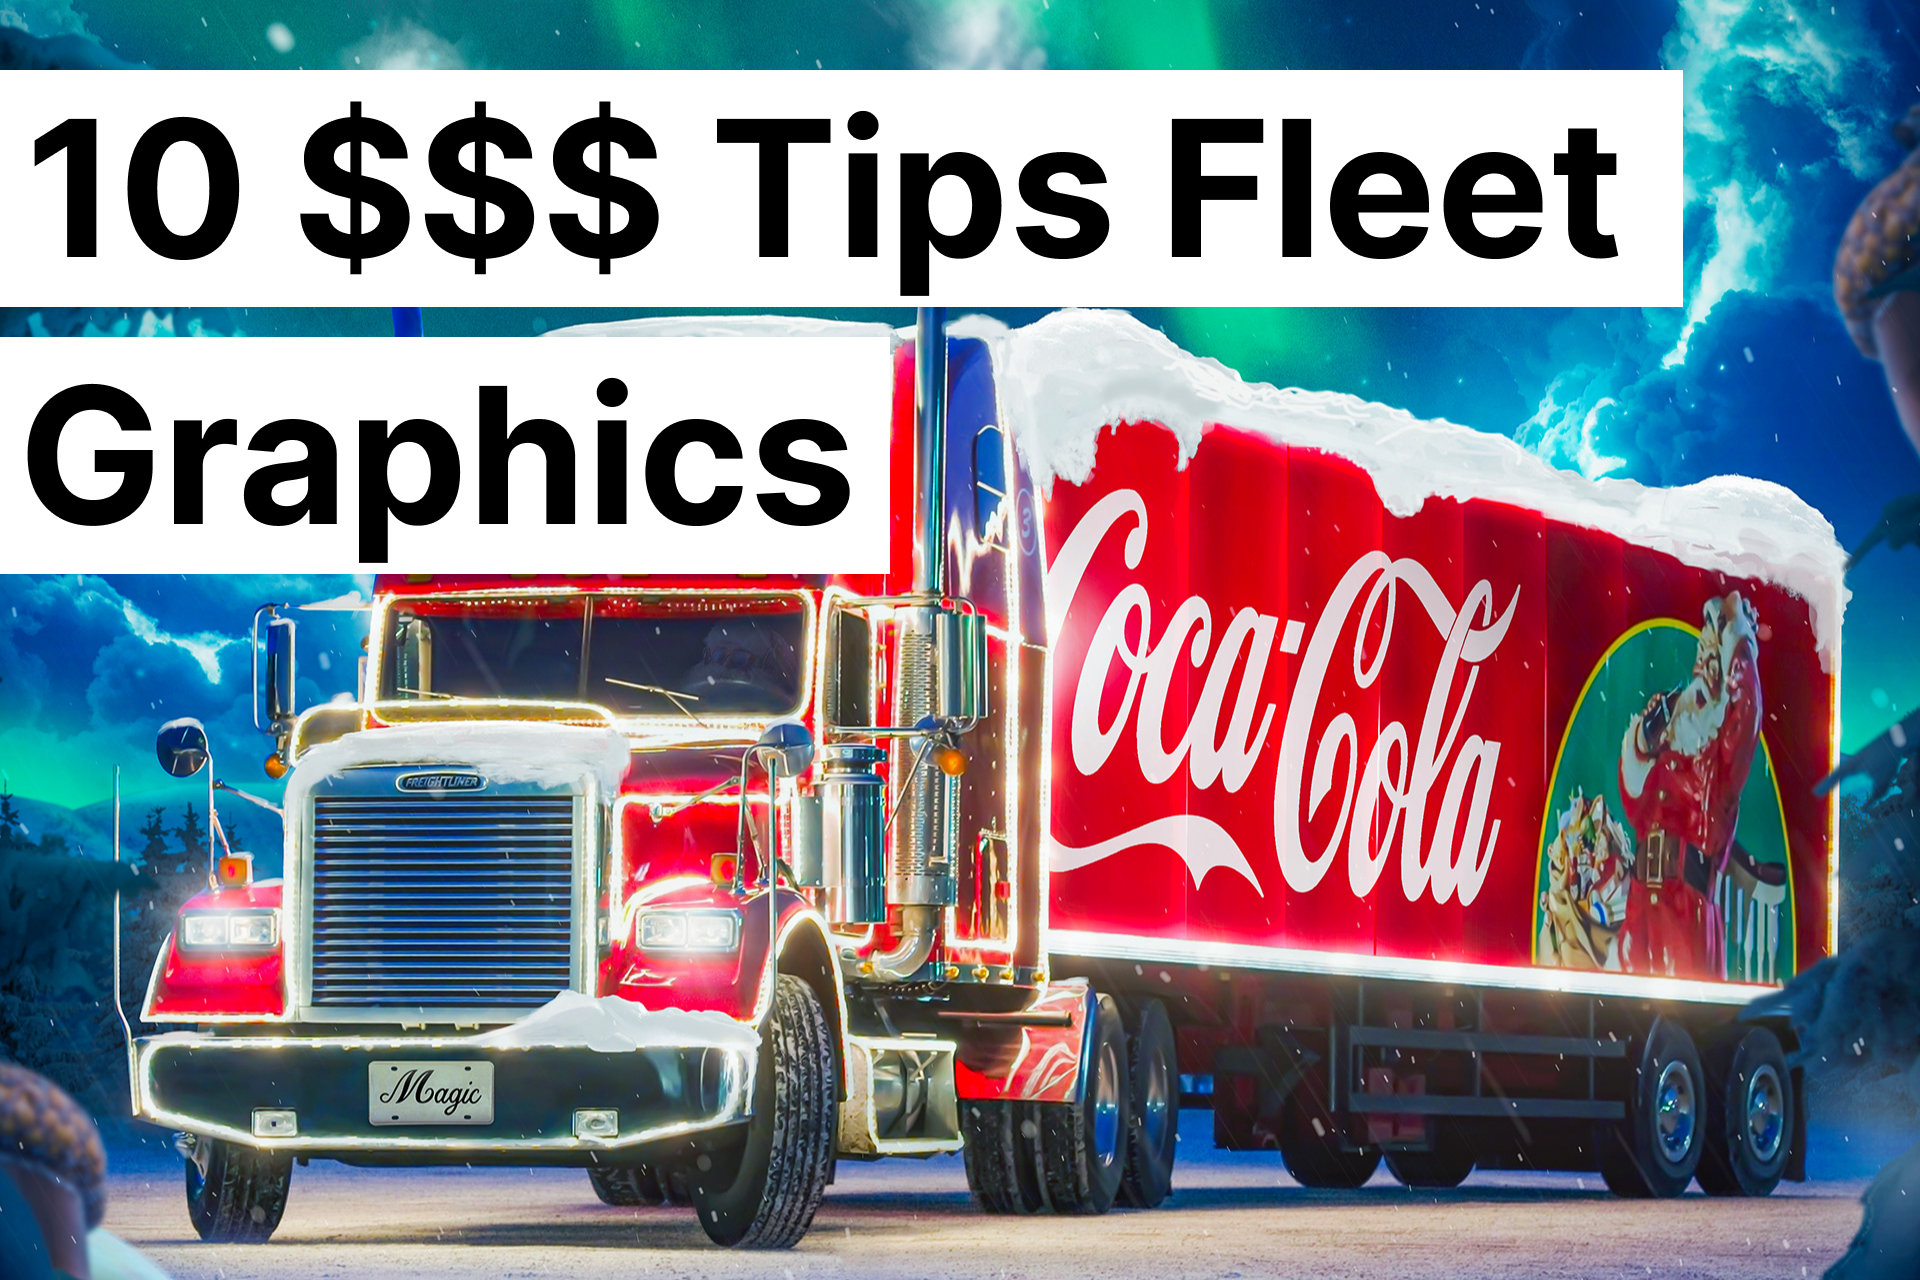 10 Tips To Save Money When Buying Fleet Graphics